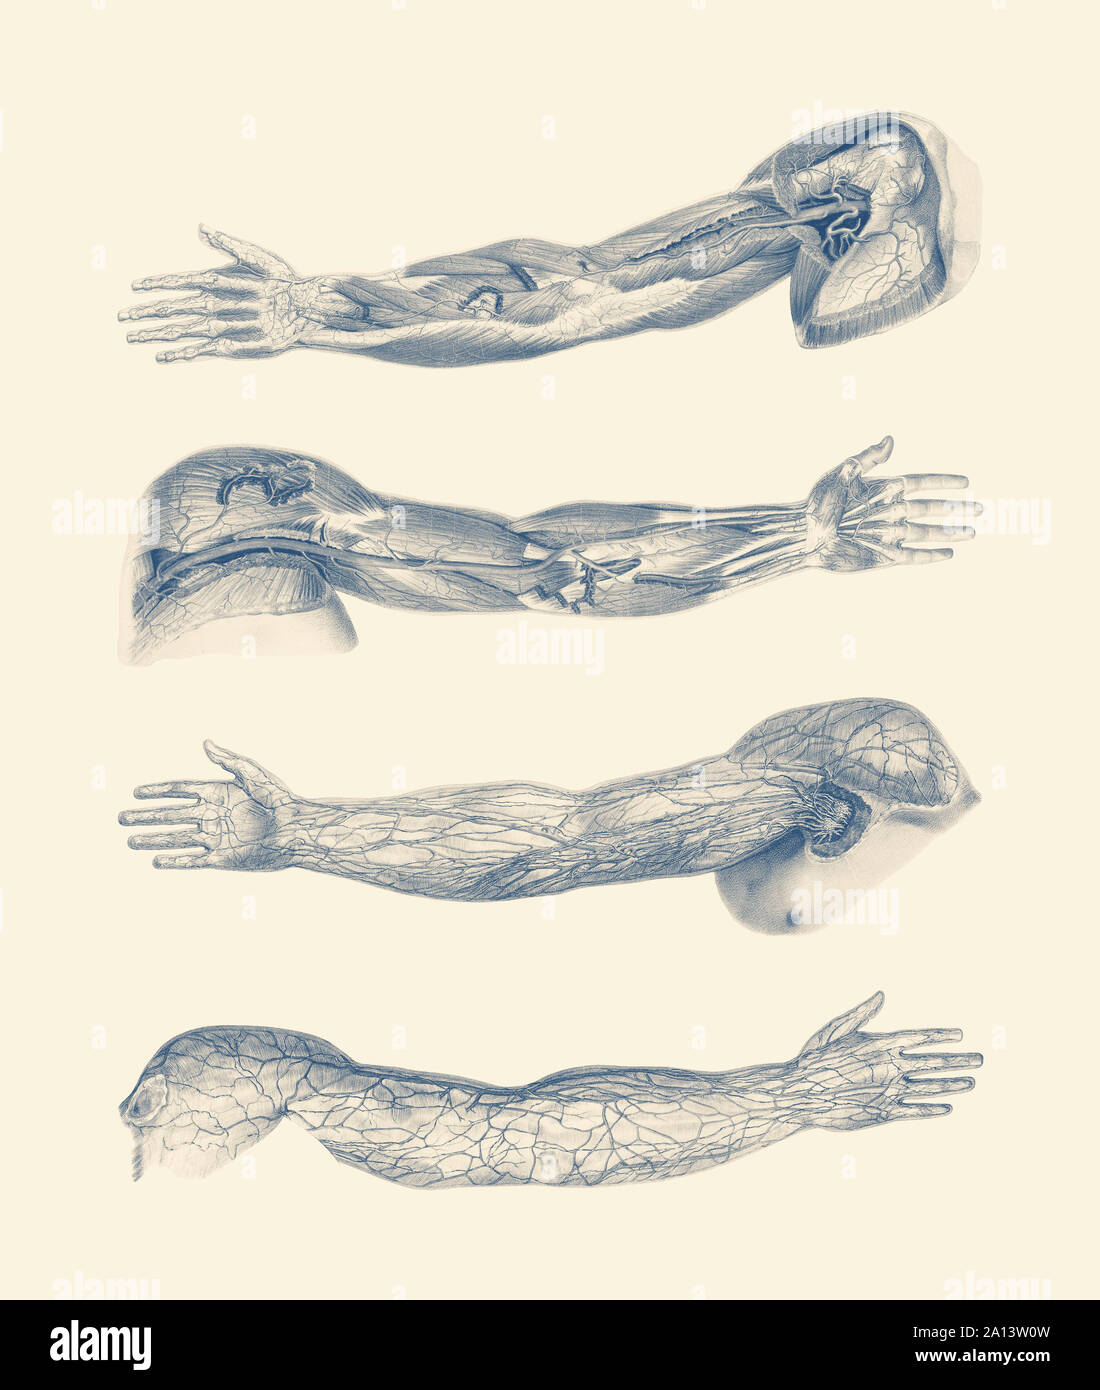 A quad-view diagram of the human arm and hand, showcasing ligaments, muscles and veins. Stock Photo